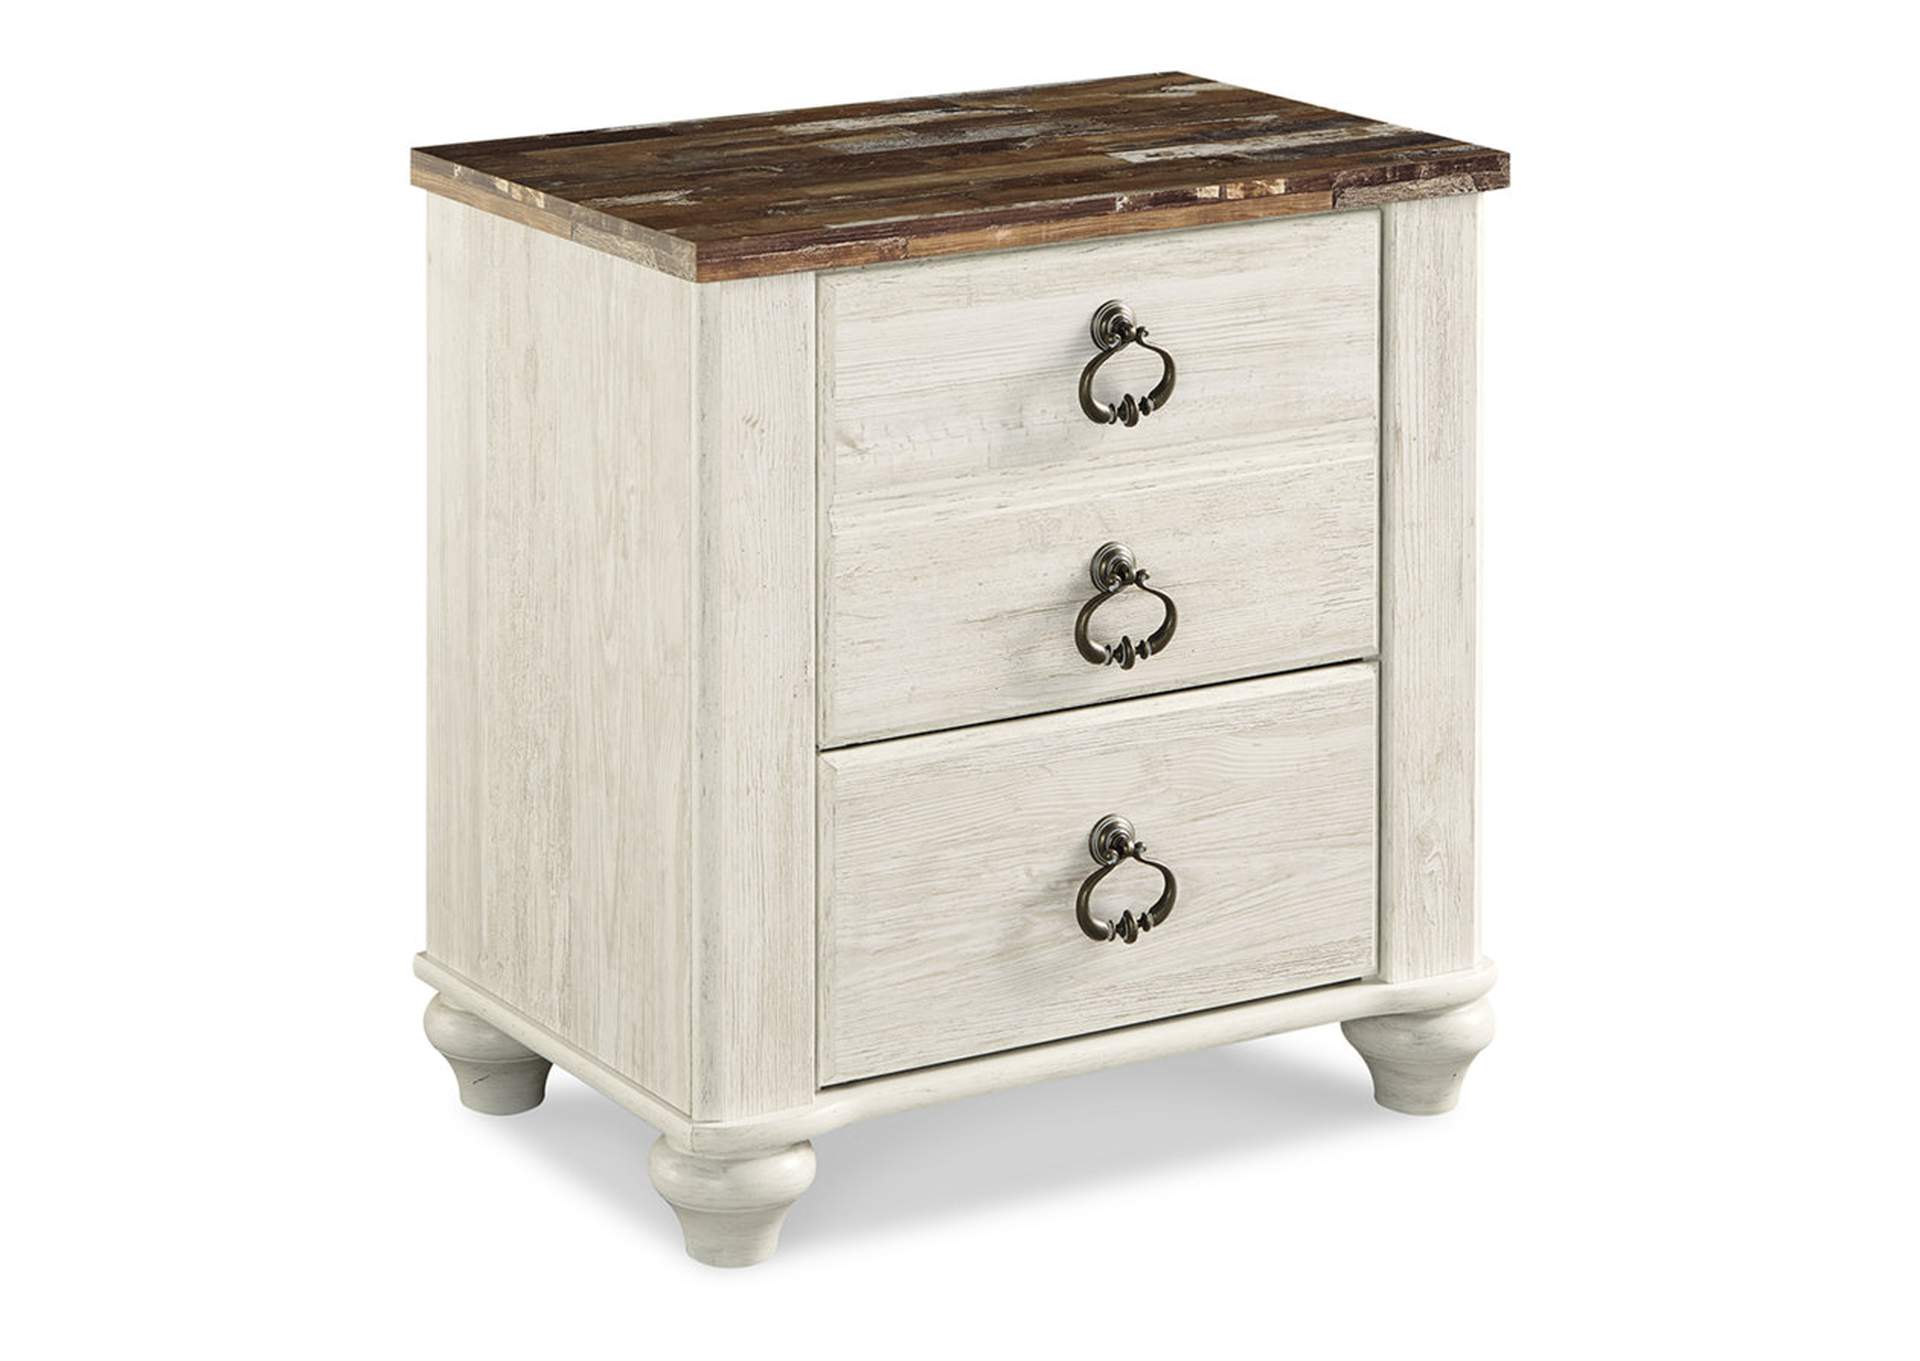 Willowton King Panel Bed, Dresser, Mirror, Chest and 2 Nightstands,Signature Design By Ashley